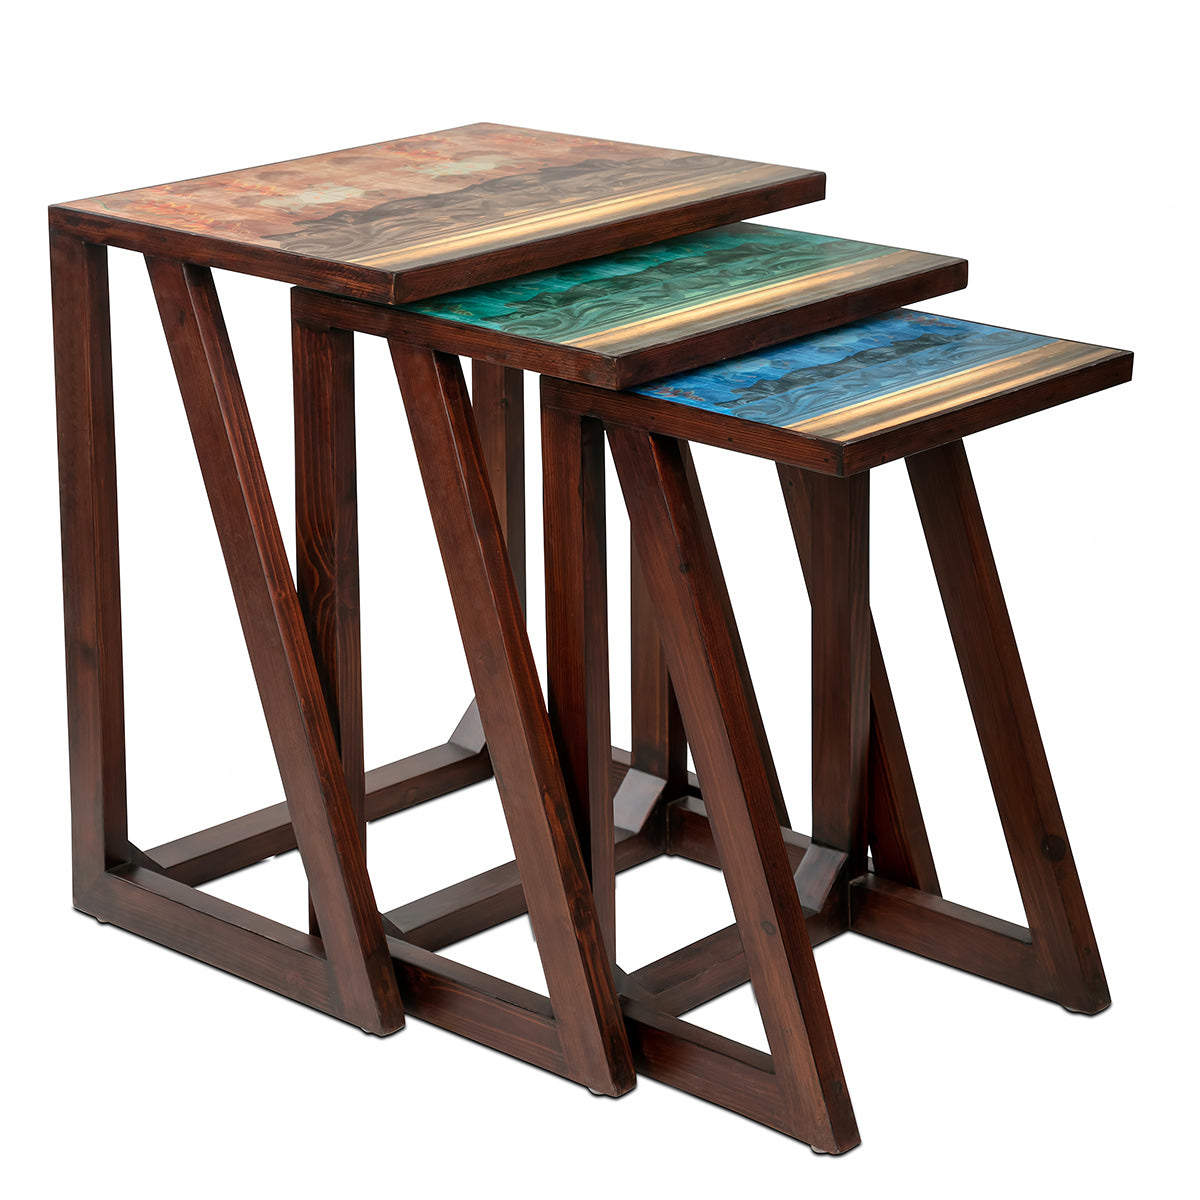 Pichwai Nesting Tables (Set Of 3)